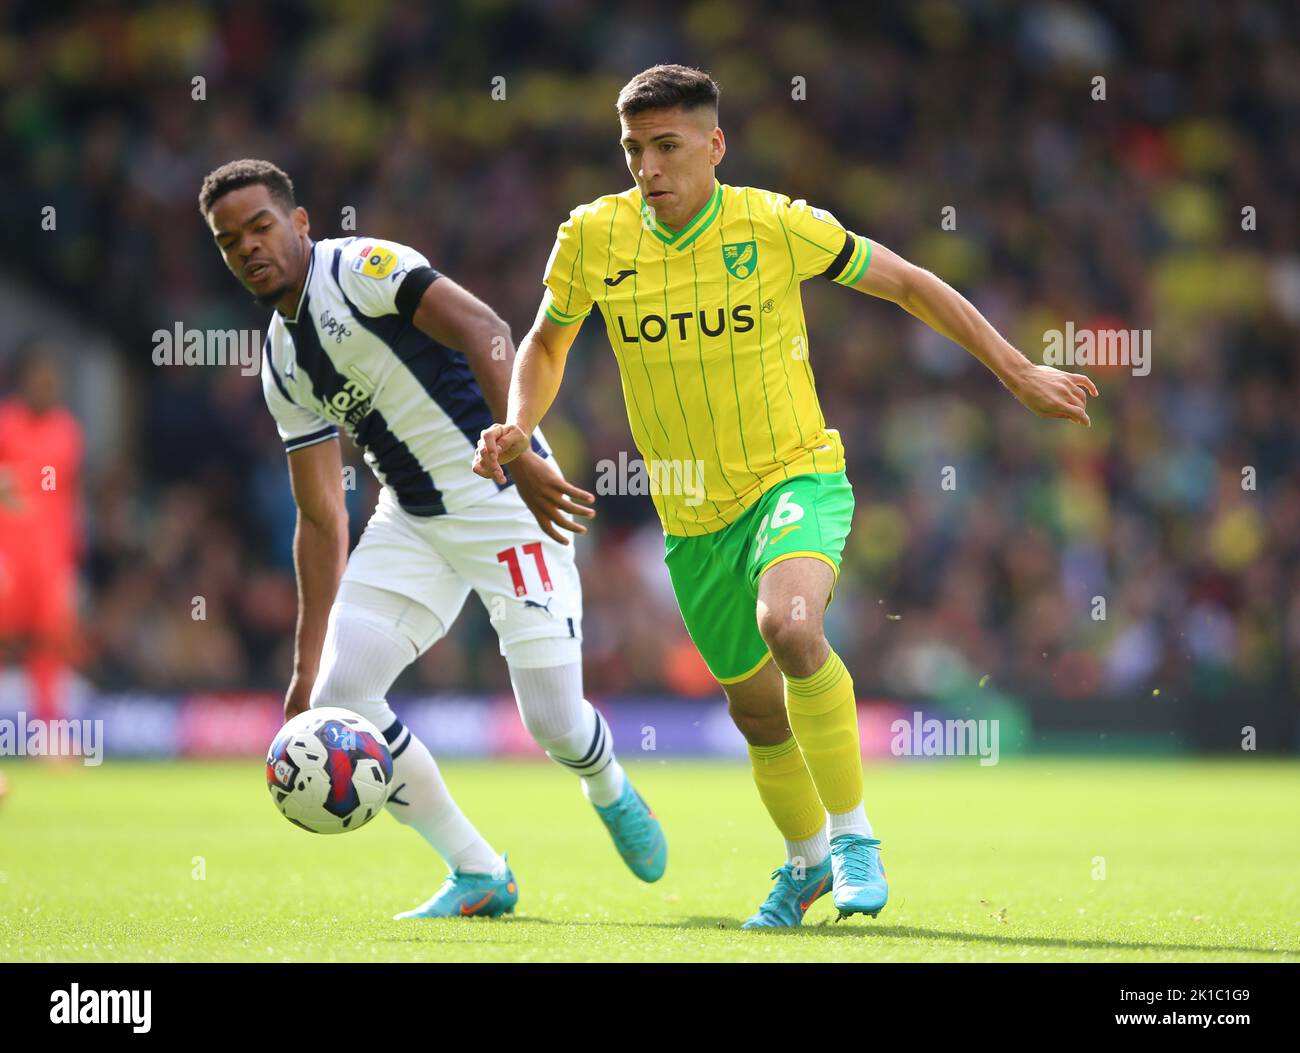 Norwich City's Marcelino Nunez (right) and West Bromwich Albion's Grady Diangana battle for the ball during the Sky Bet Championship match at Carrow Road, Norwich. Picture date: Saturday September 17, 2022. Stock Photo